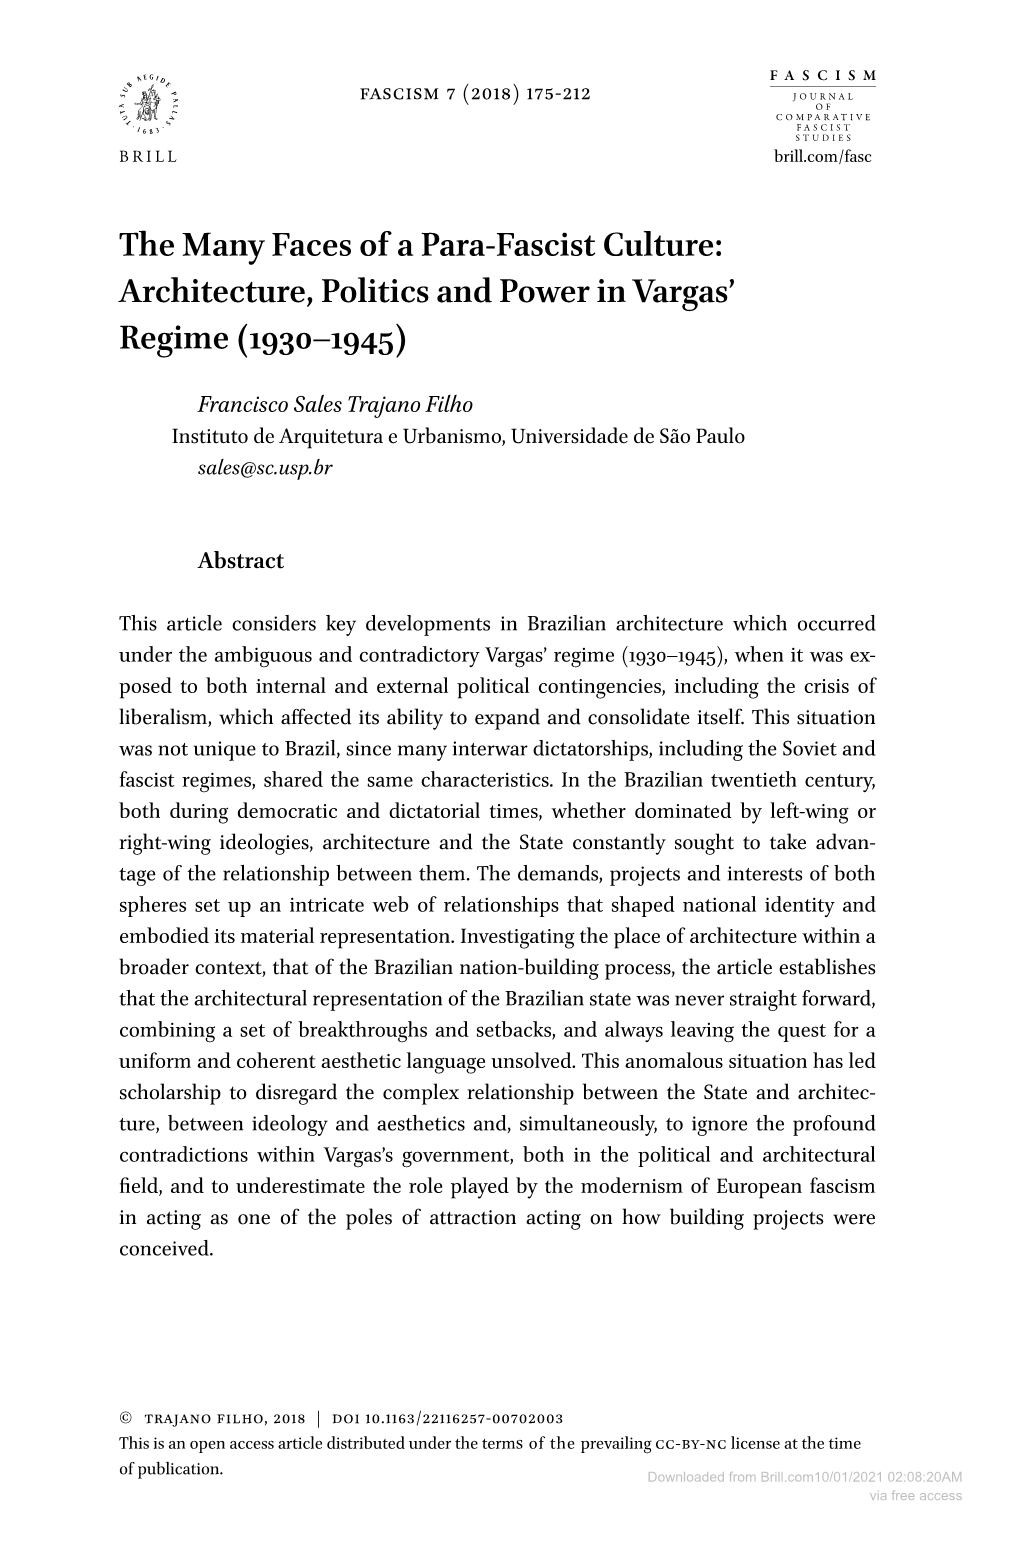 The Many Faces of a Para-Fascist Culture: Architecture, Politics and Power in Vargas’ Regime (1930–1945)